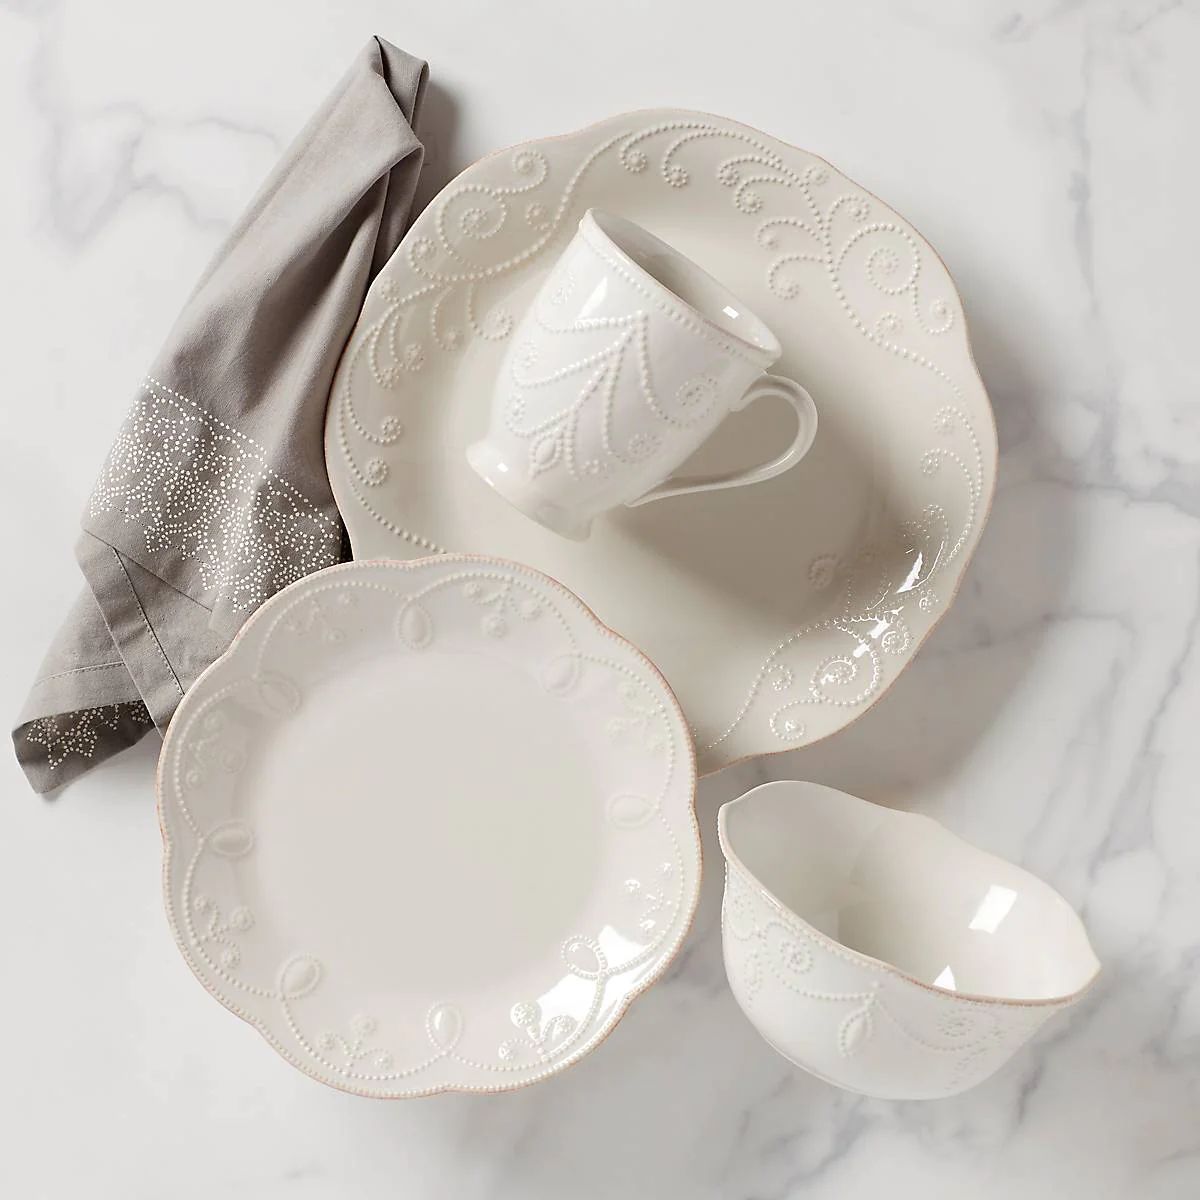 French Perle 4-Piece Place Setting | Lenox